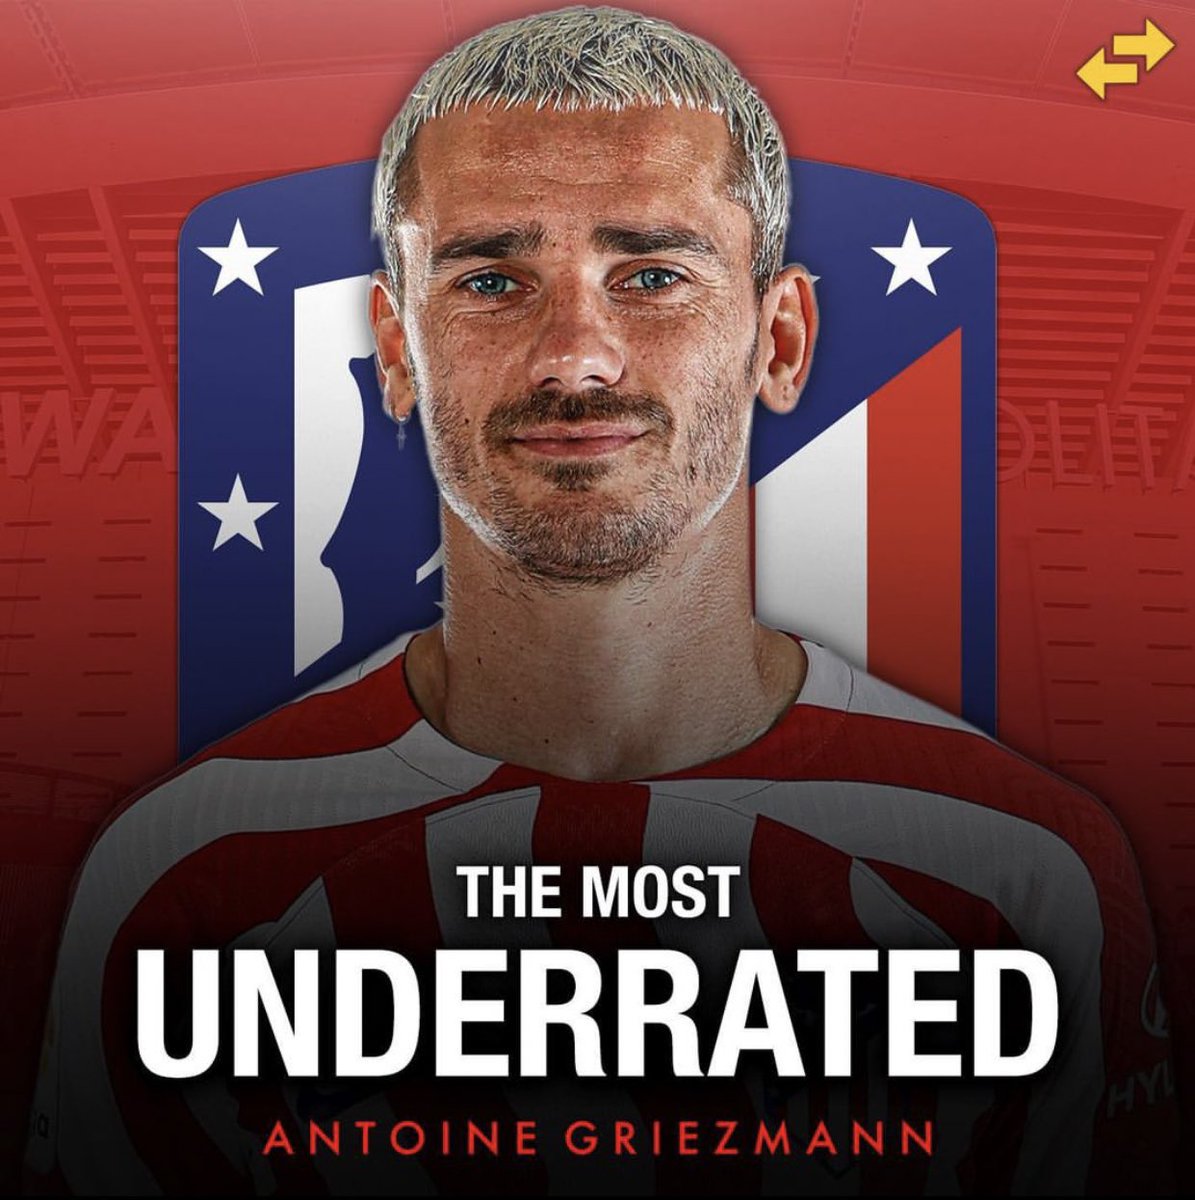 RT @modap_: Most underrated players currently in the world, A thread 

1. Antoine Griezmann https://t.co/Tm8aDeUZik